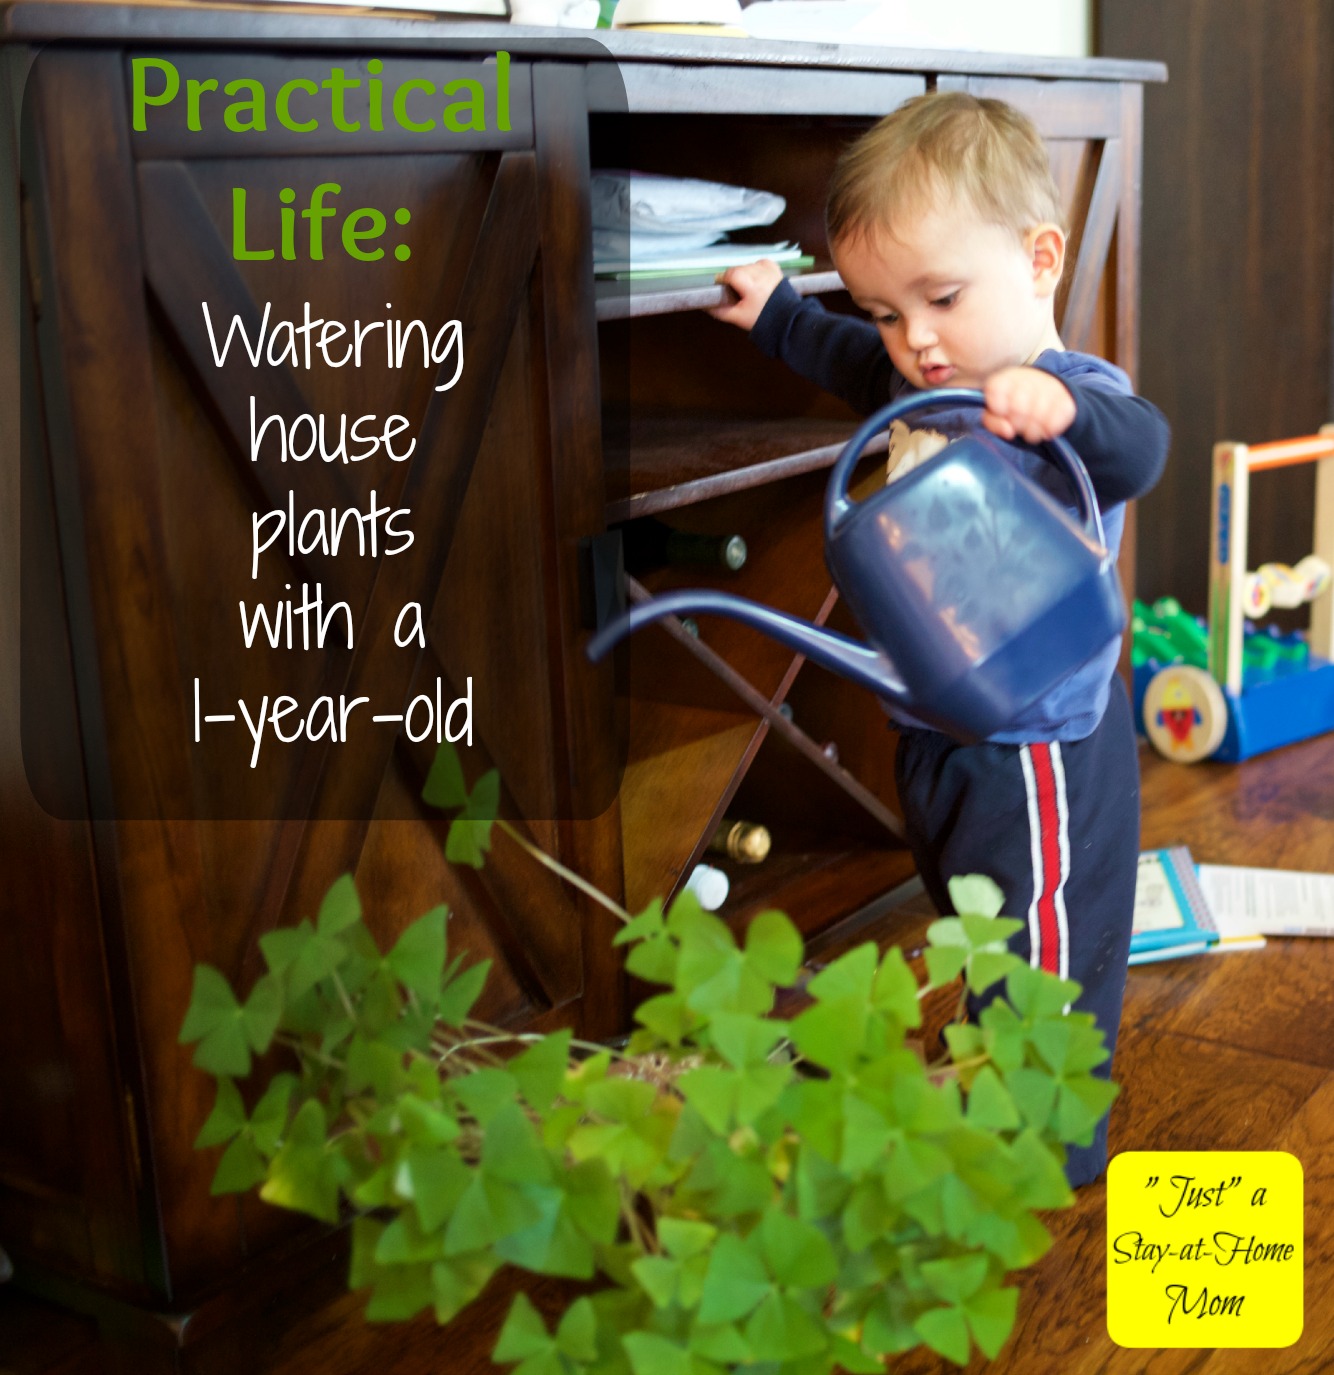 Practical life: 1-year-old watering